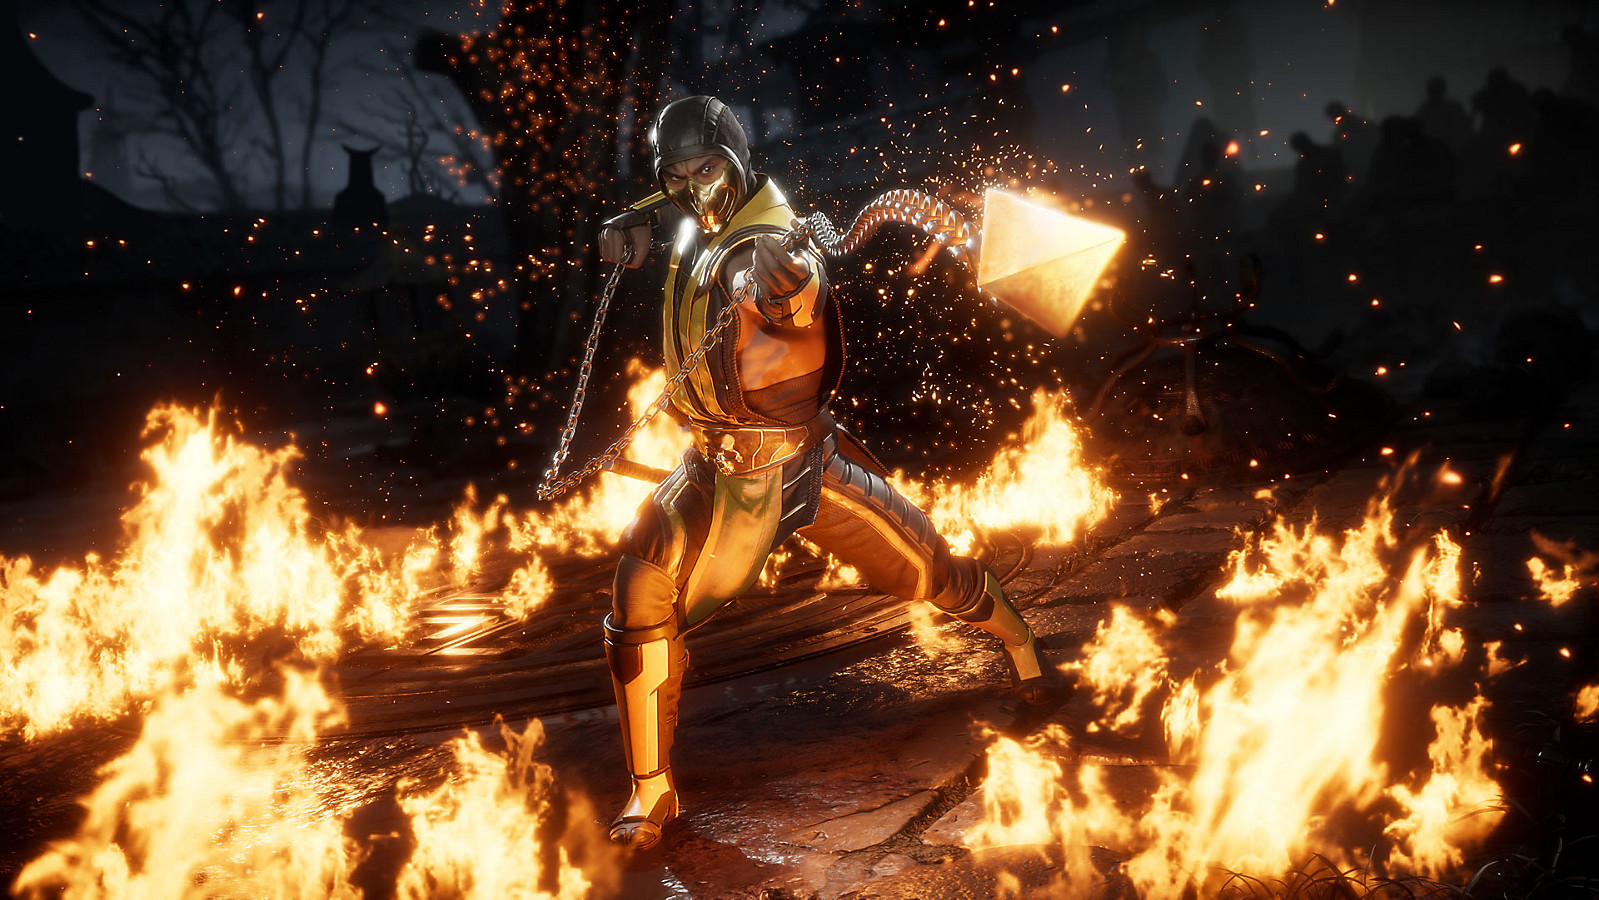 A Beginner's Guide to Flawless Victory in Mortal Kombat 11